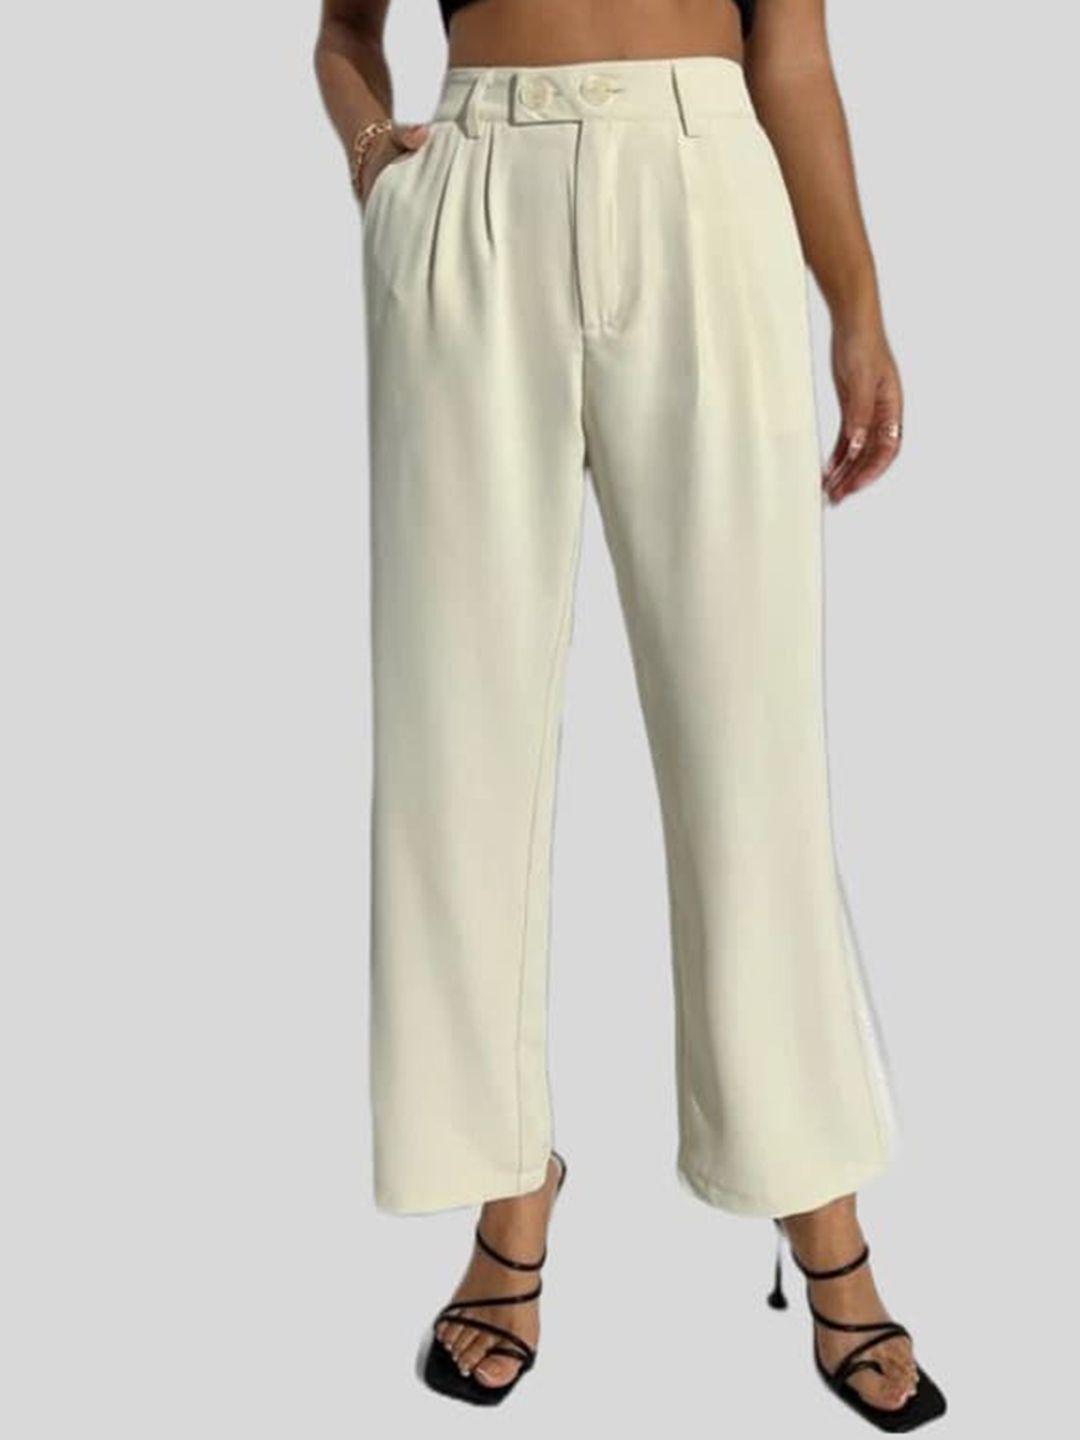 fnocks women comfort pure cotton pleated parallel trousers